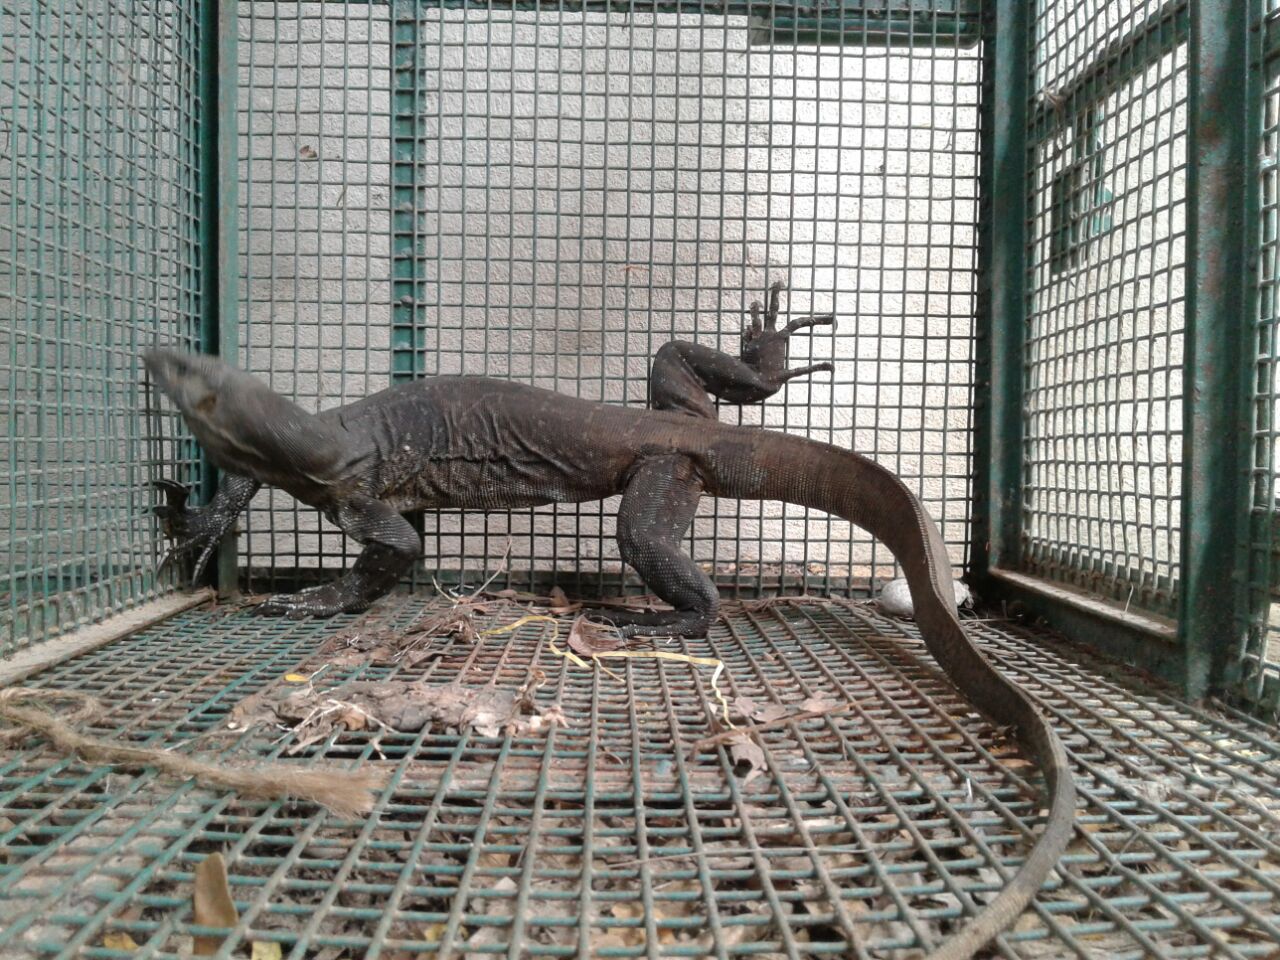 Injured Monitor Lizard found and rescued in Parampalli area